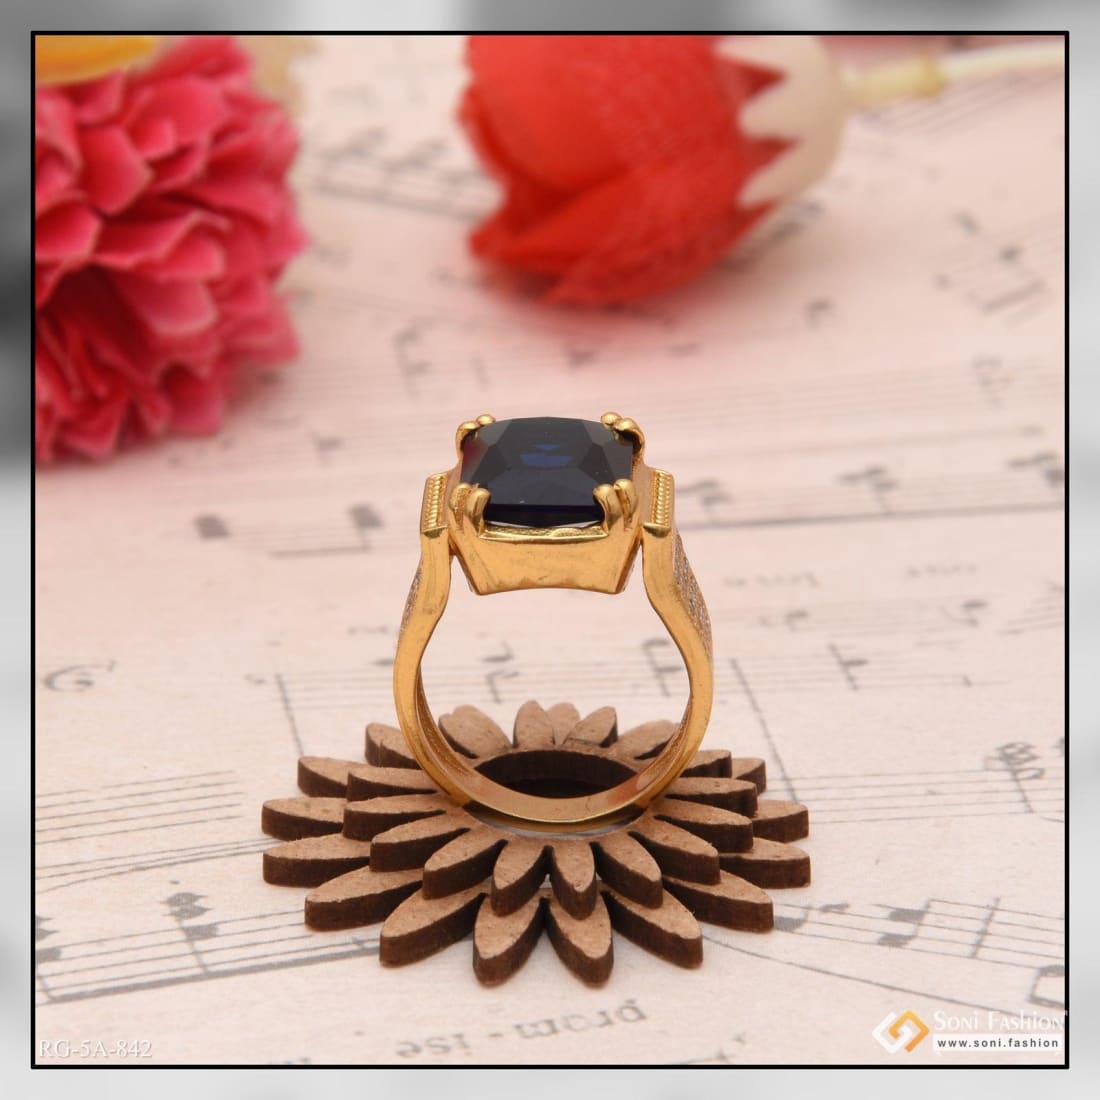 Buy Gold Plated Gold Finger Ring Design with Stone for Wedding